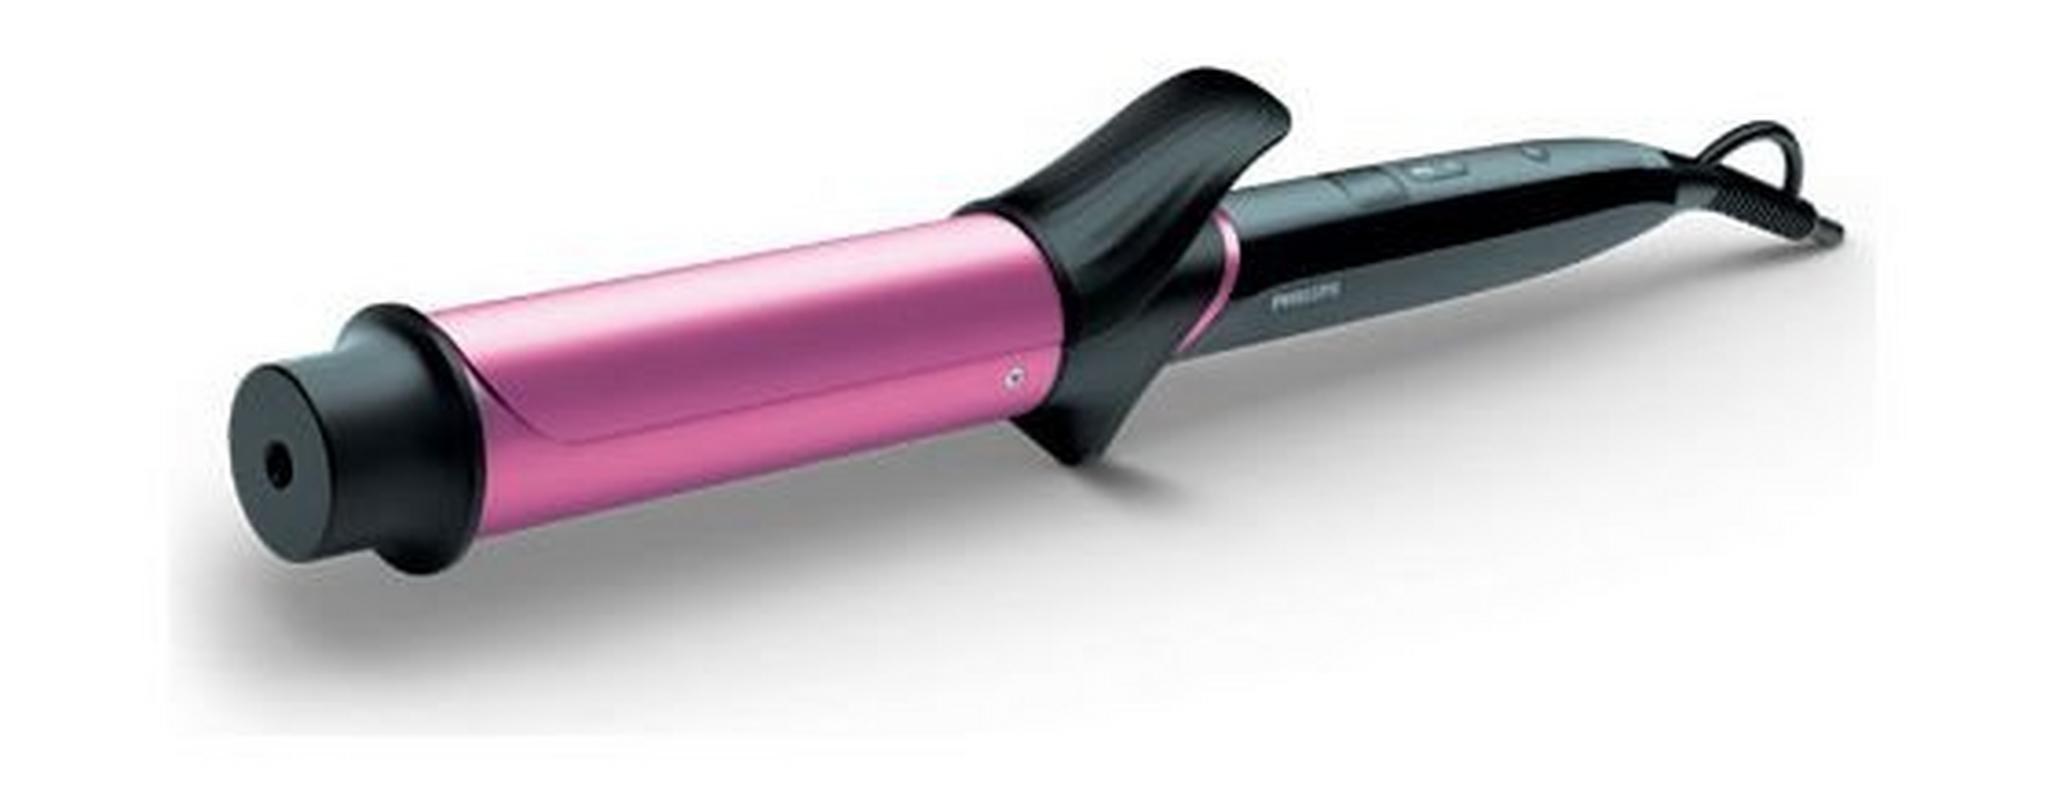 Philips StyleCare Sublime Ends Curler (BHB869/03) – Pink / Black